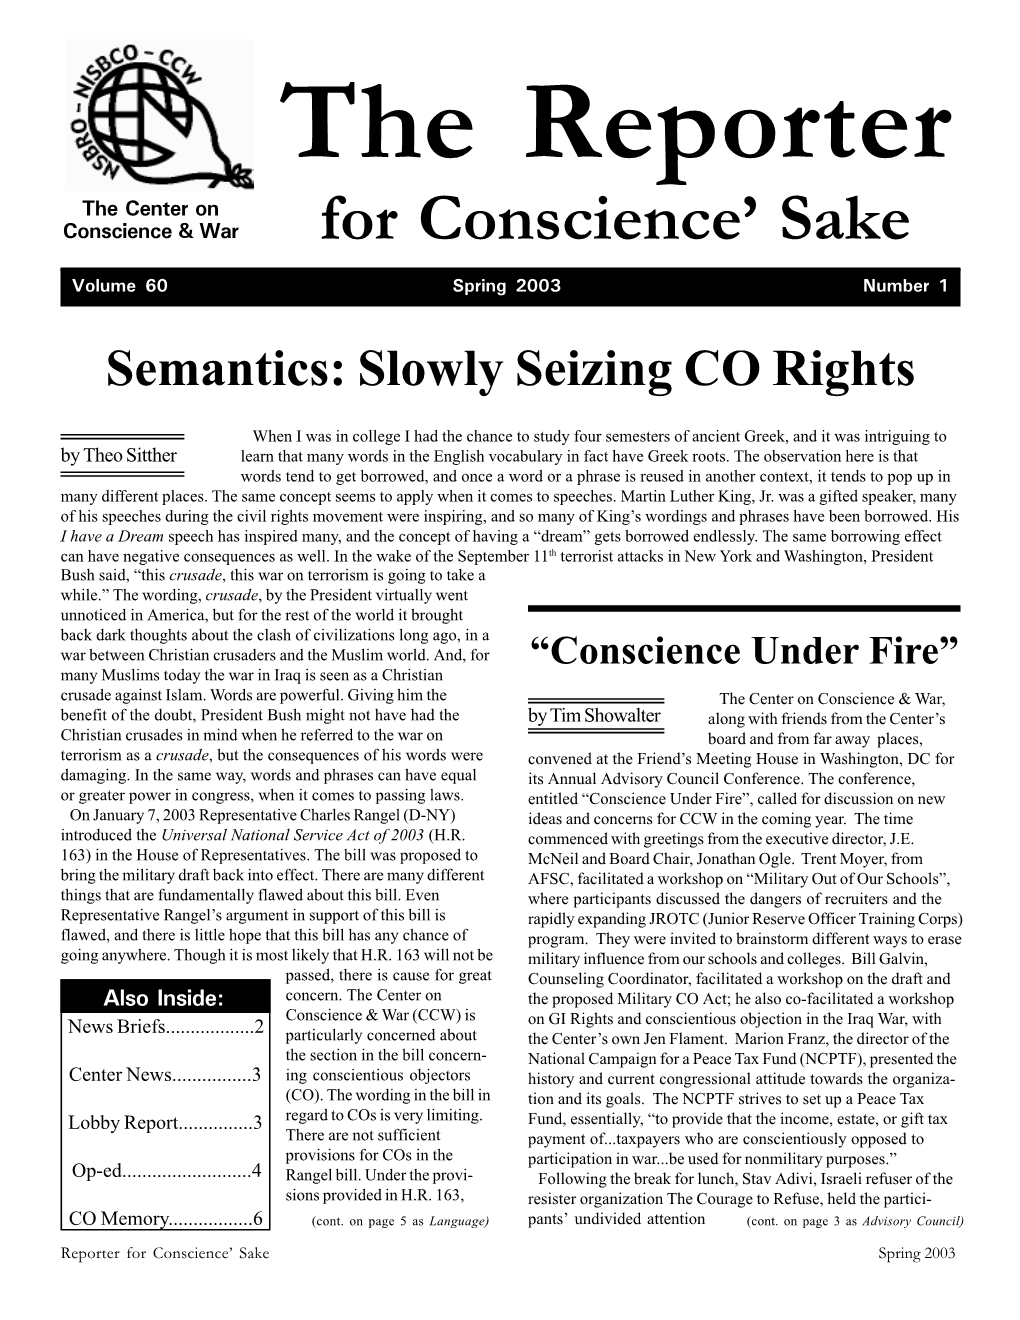 Spring 2003 Number 1 Semantics: Slowly Seizing CO Rights